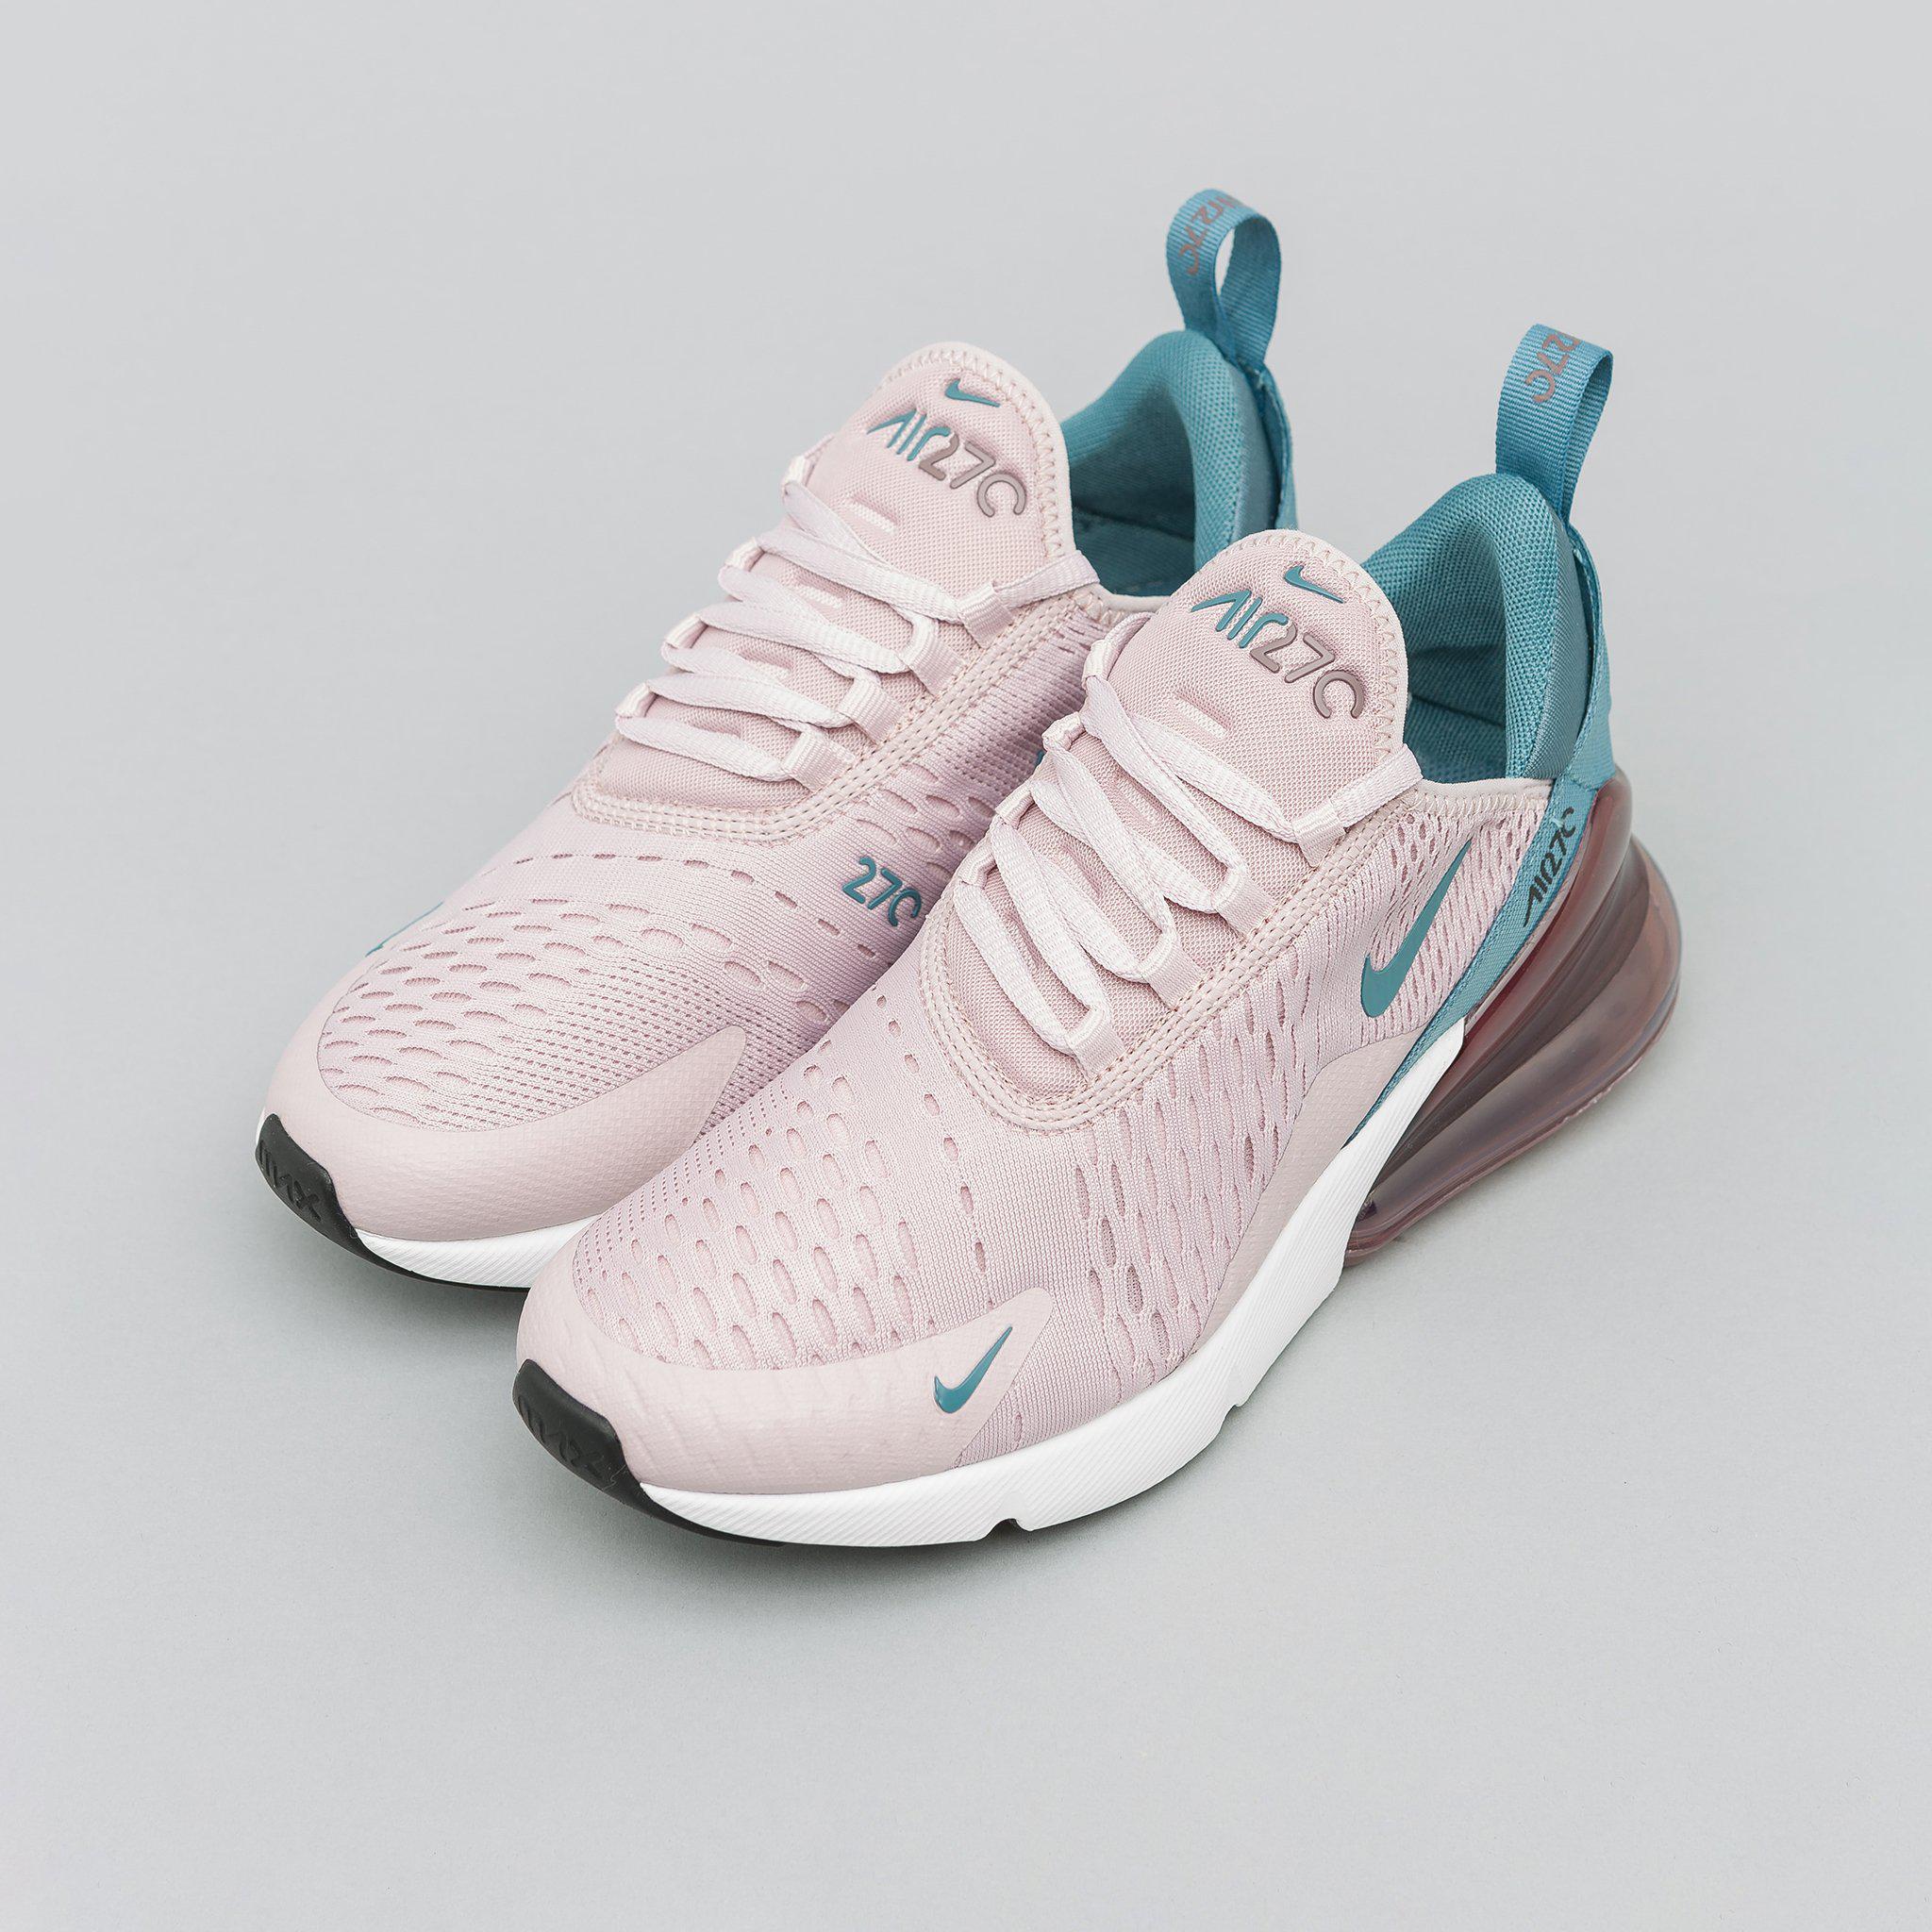 Air Max 270 Rose Gold Shop Clothing Shoes Online